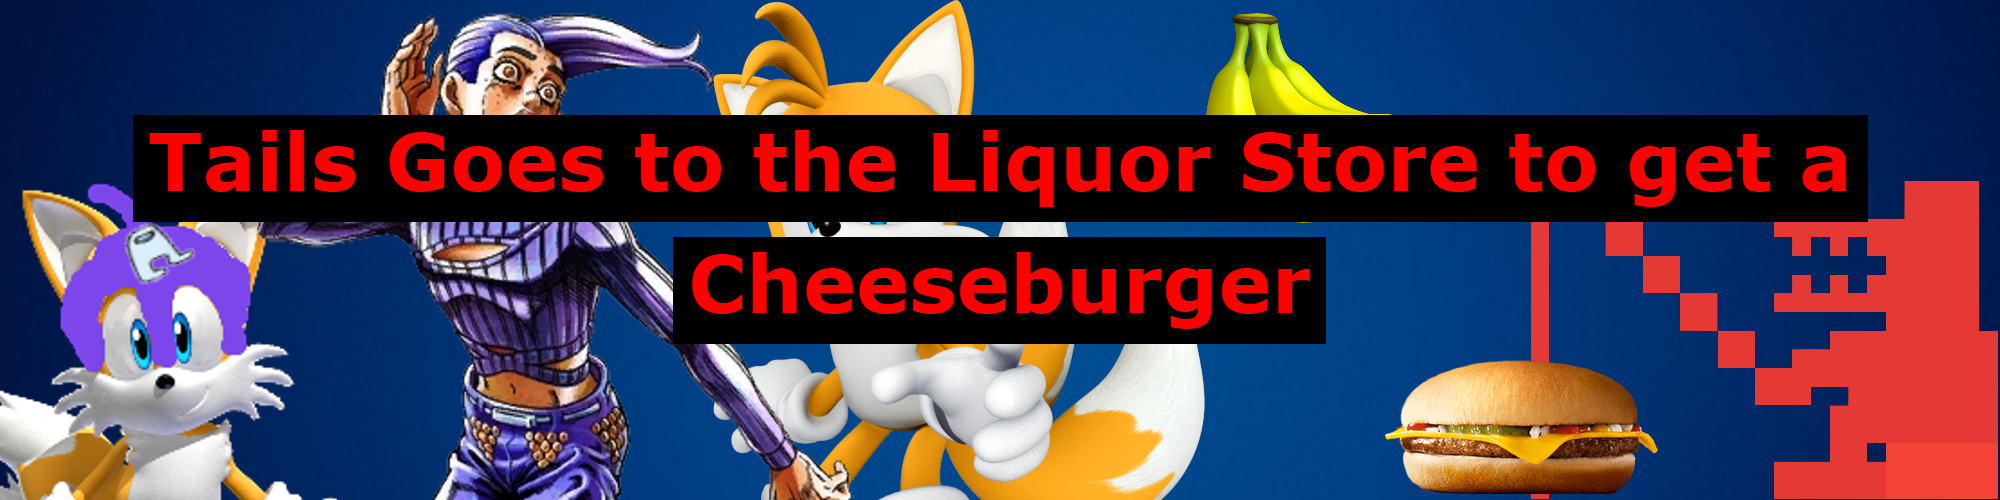 Tails Goes To The Liquor Store To Get A Cheeseburger